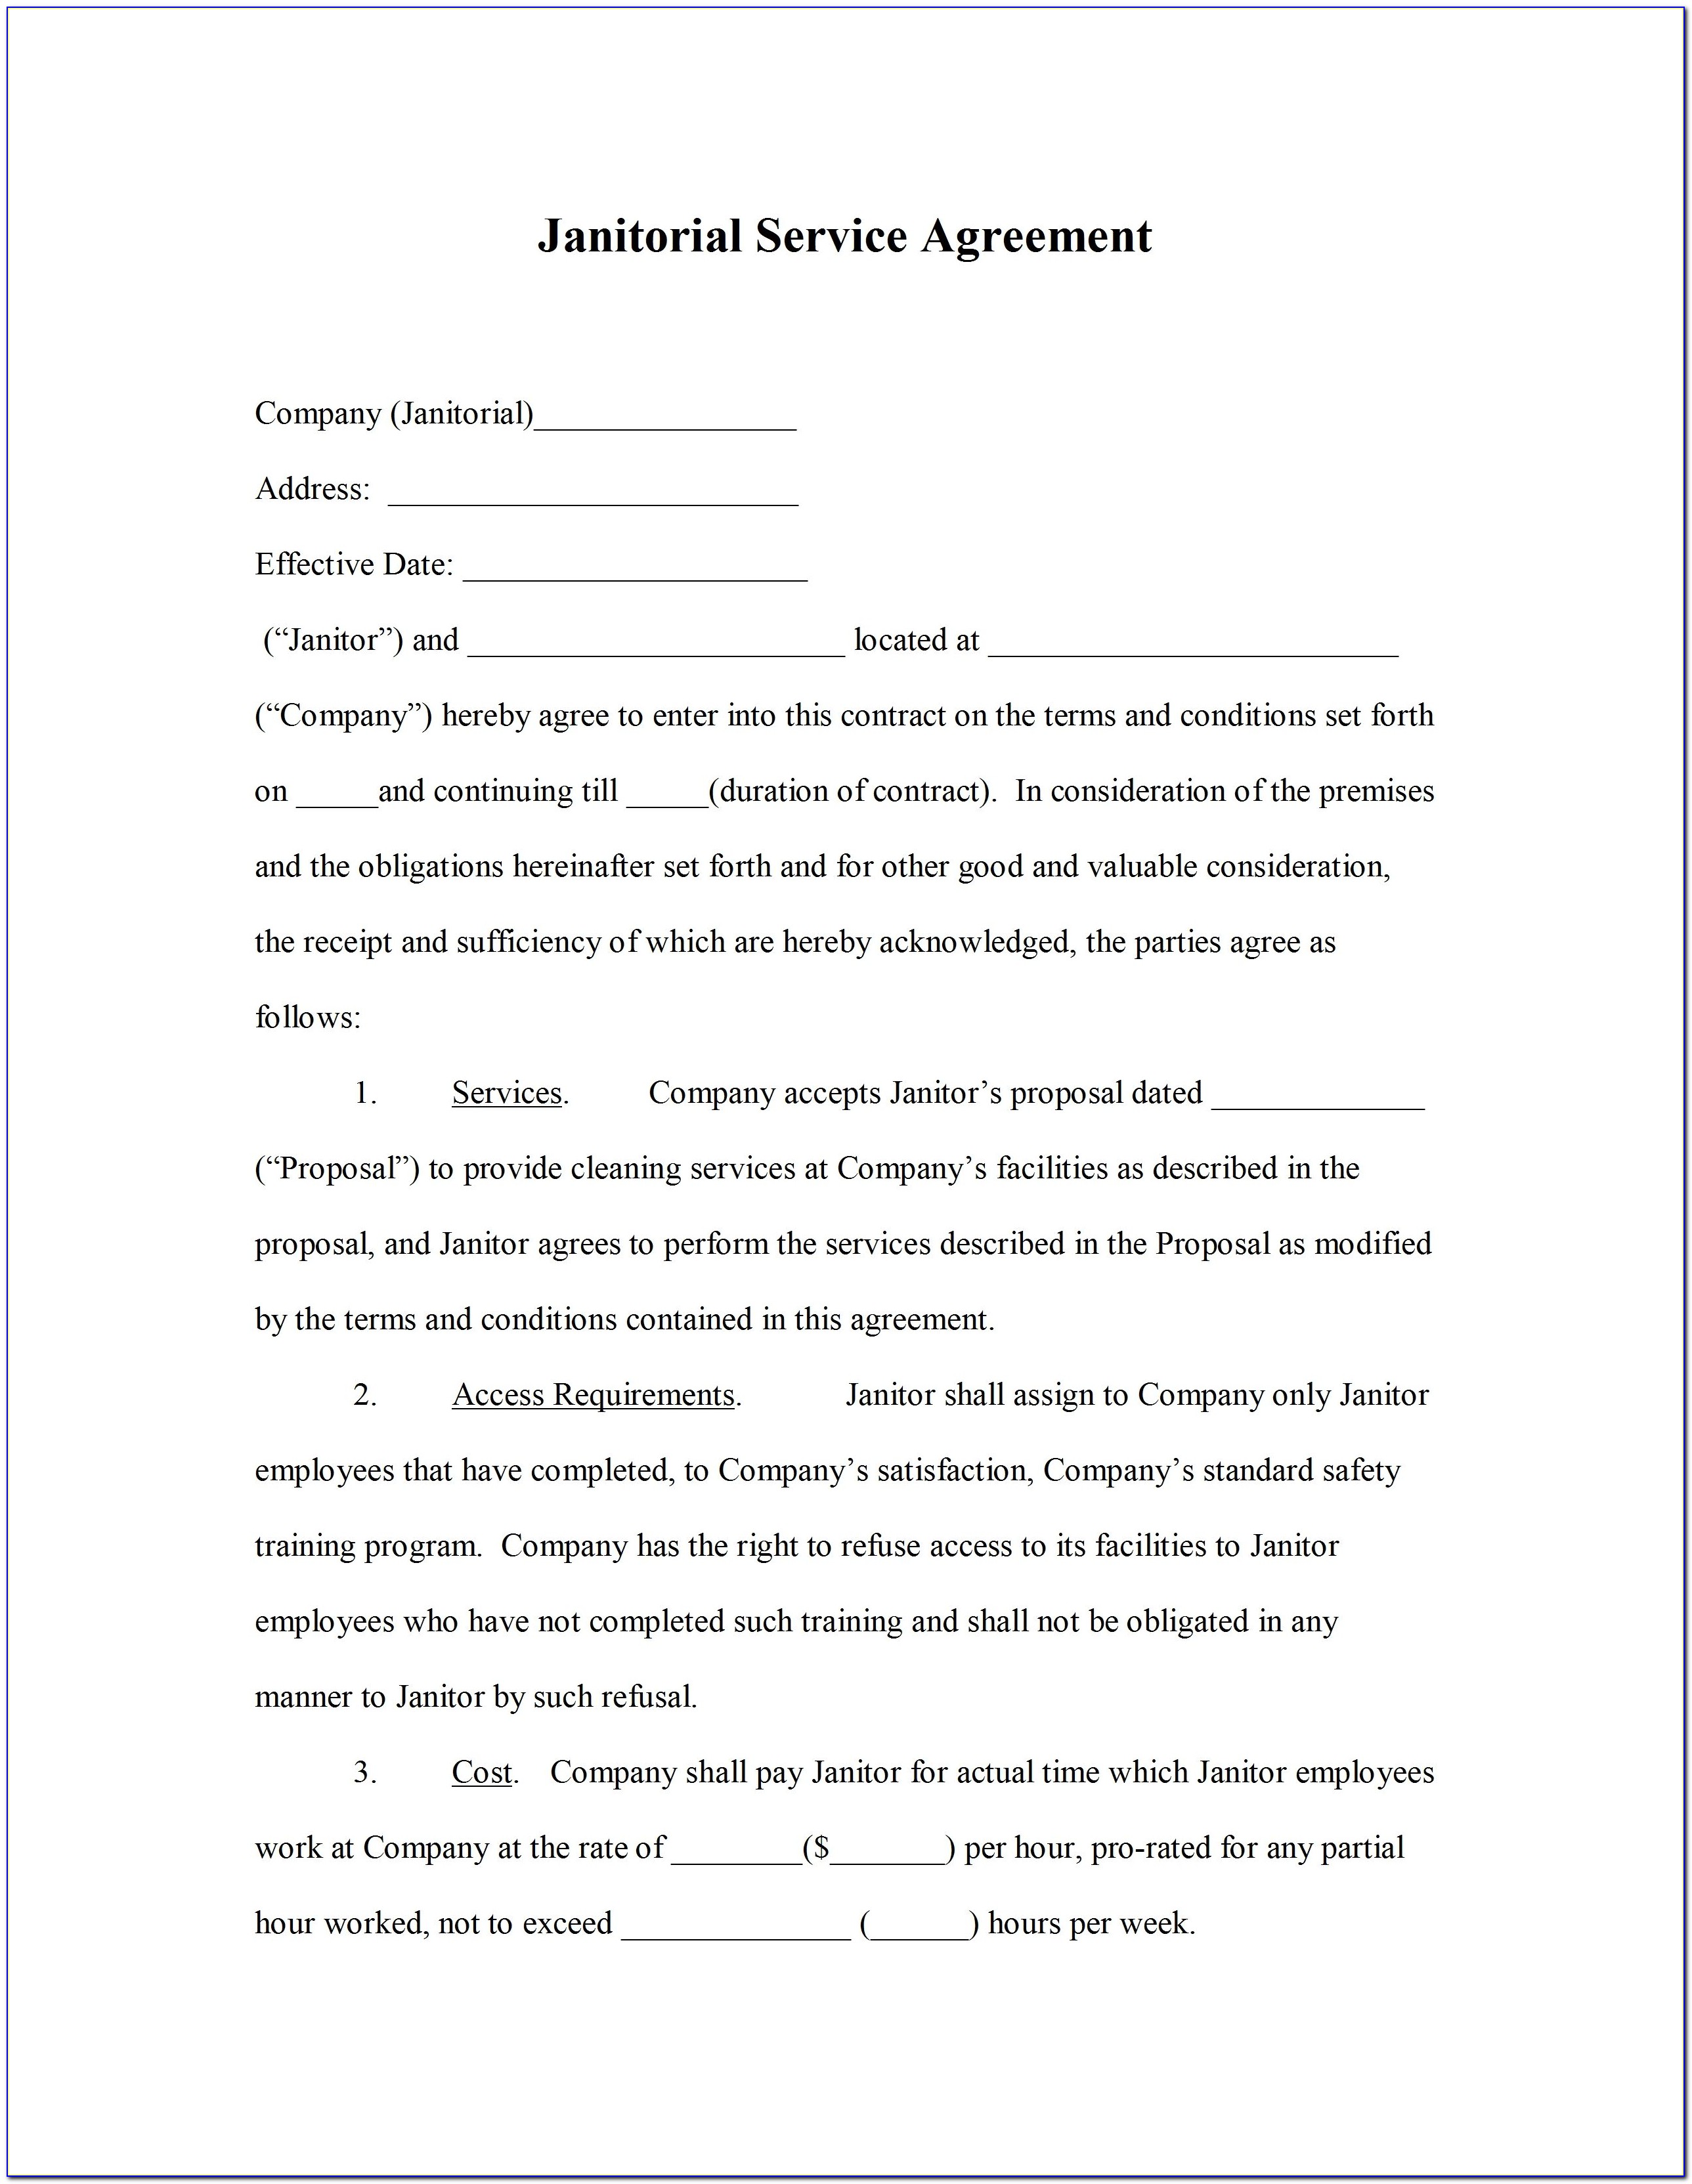 Janitorial Contracts Sample